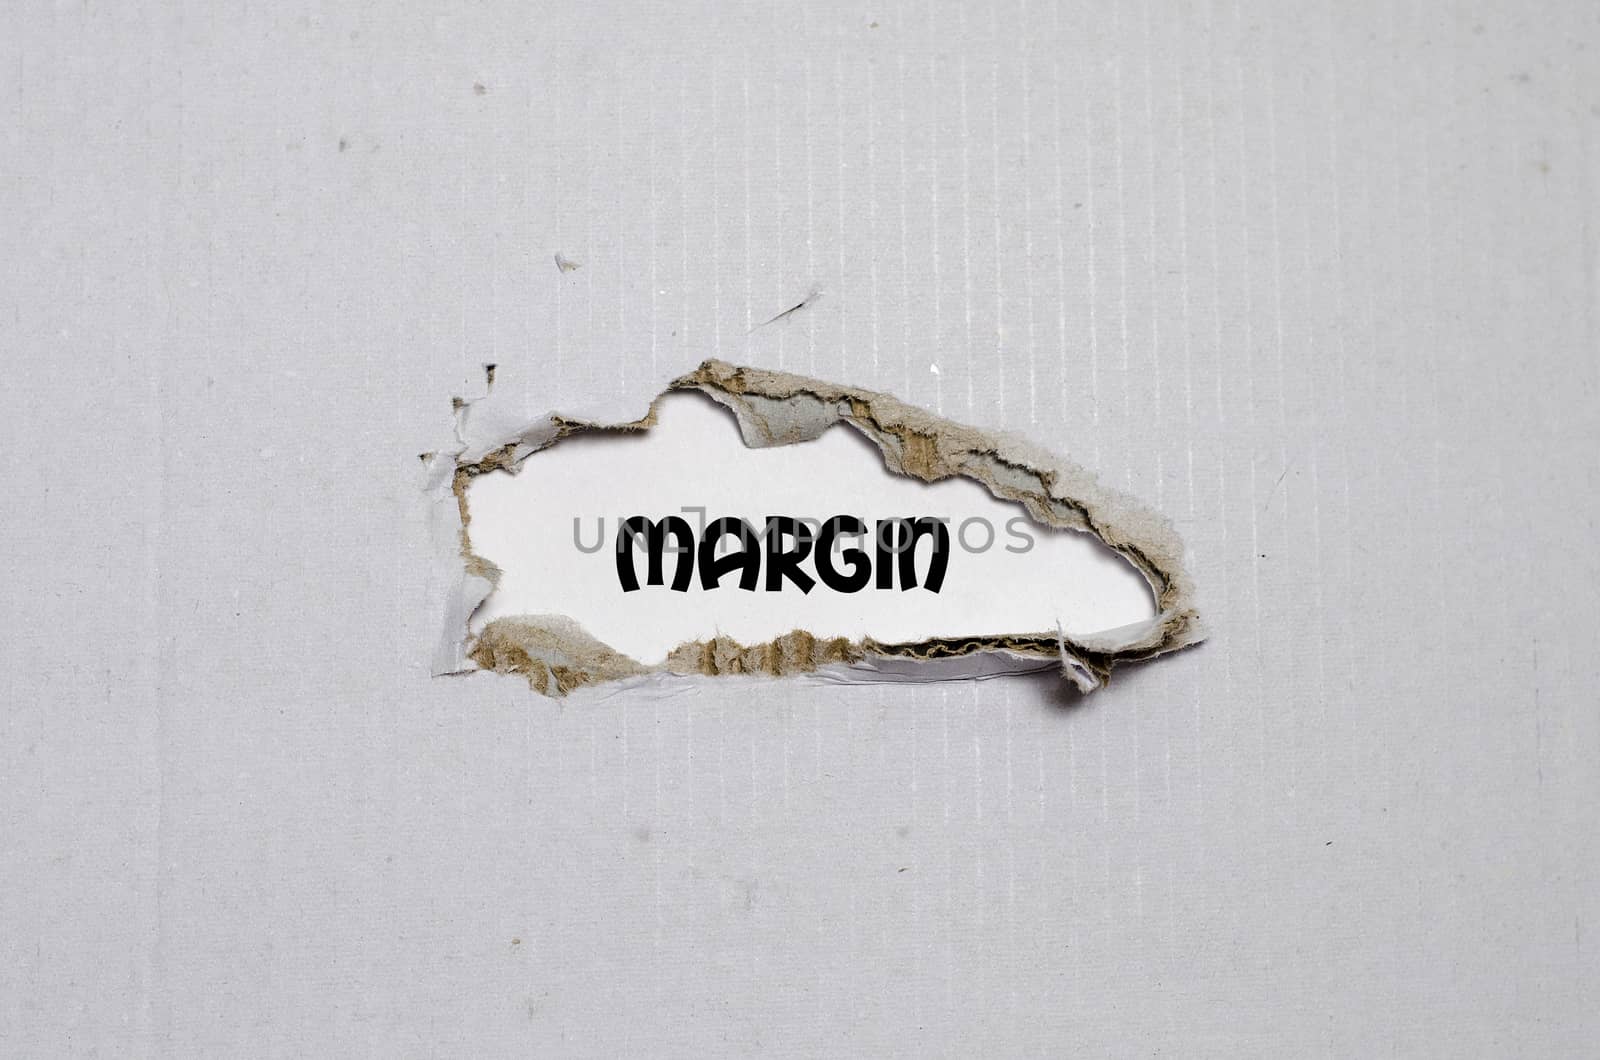 The word margin appearing behind torn paper